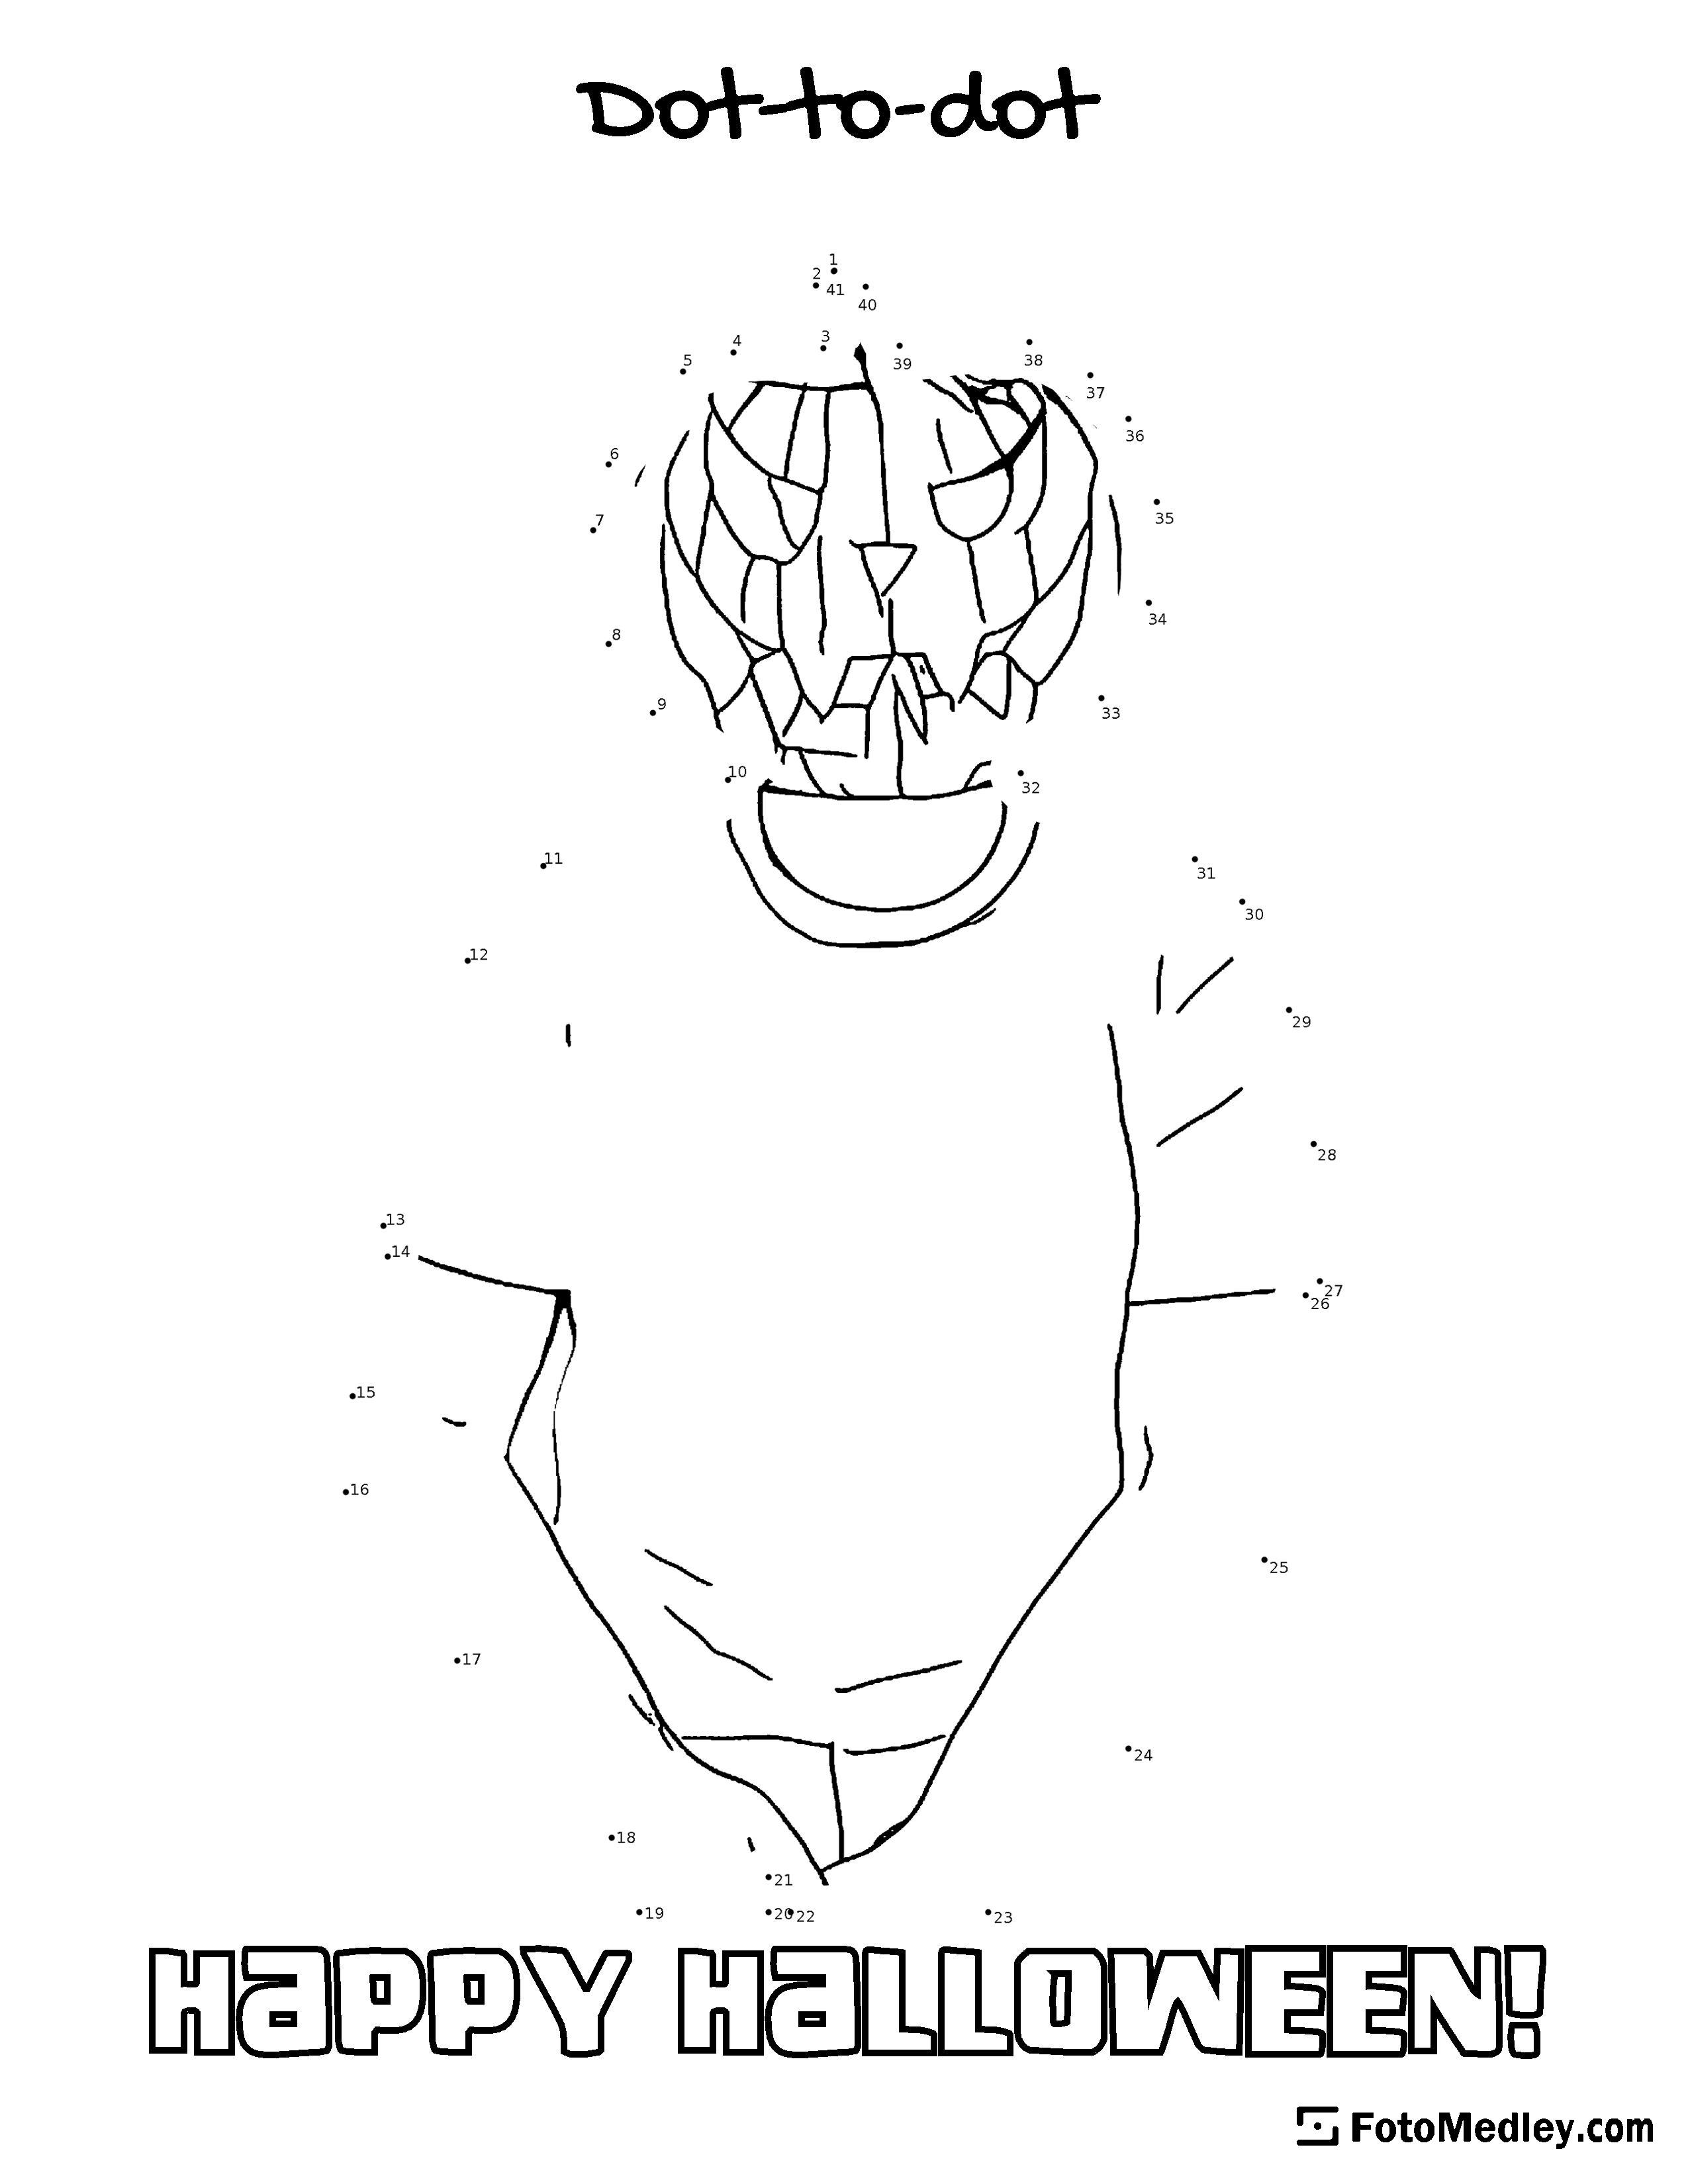 A dot-to-dot puzzle of someone in a jack-o-lantern mask.